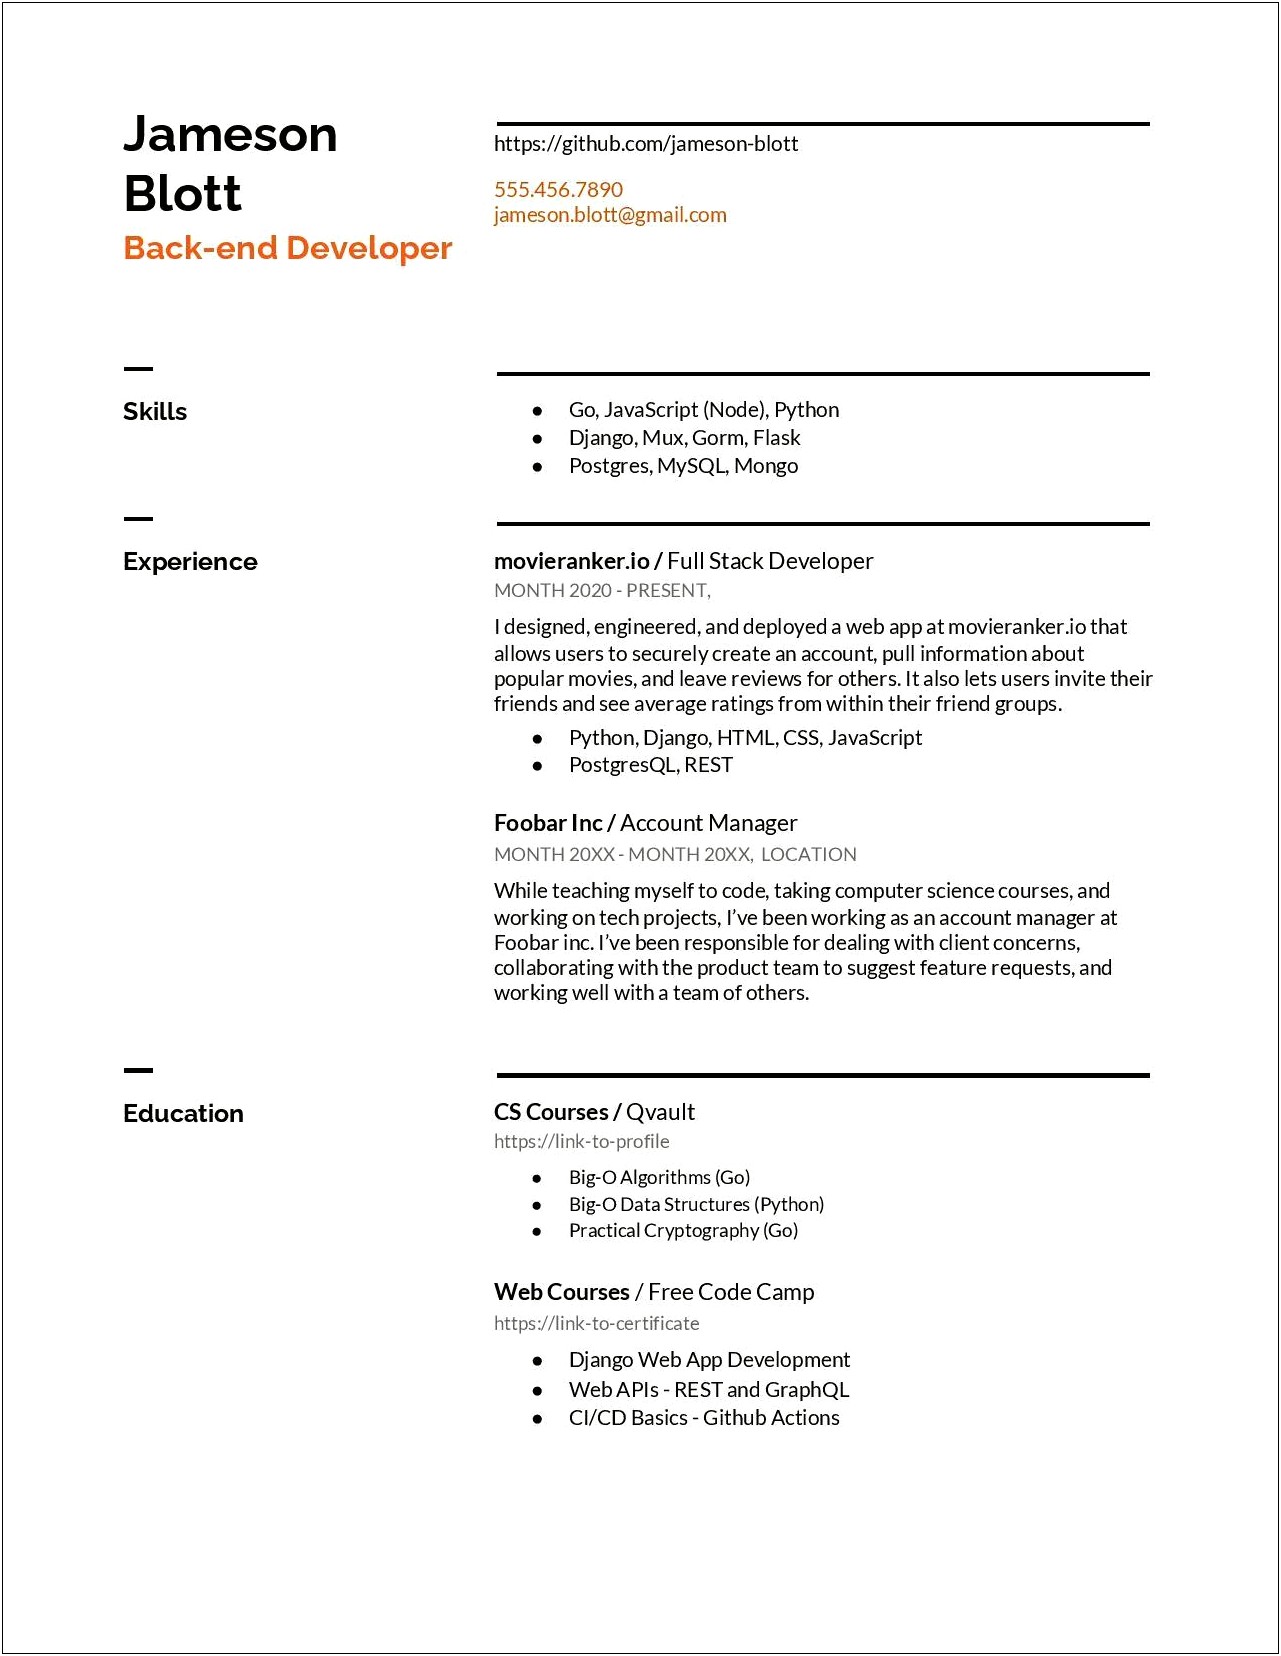 6 Month Experience Resume For Web Developer